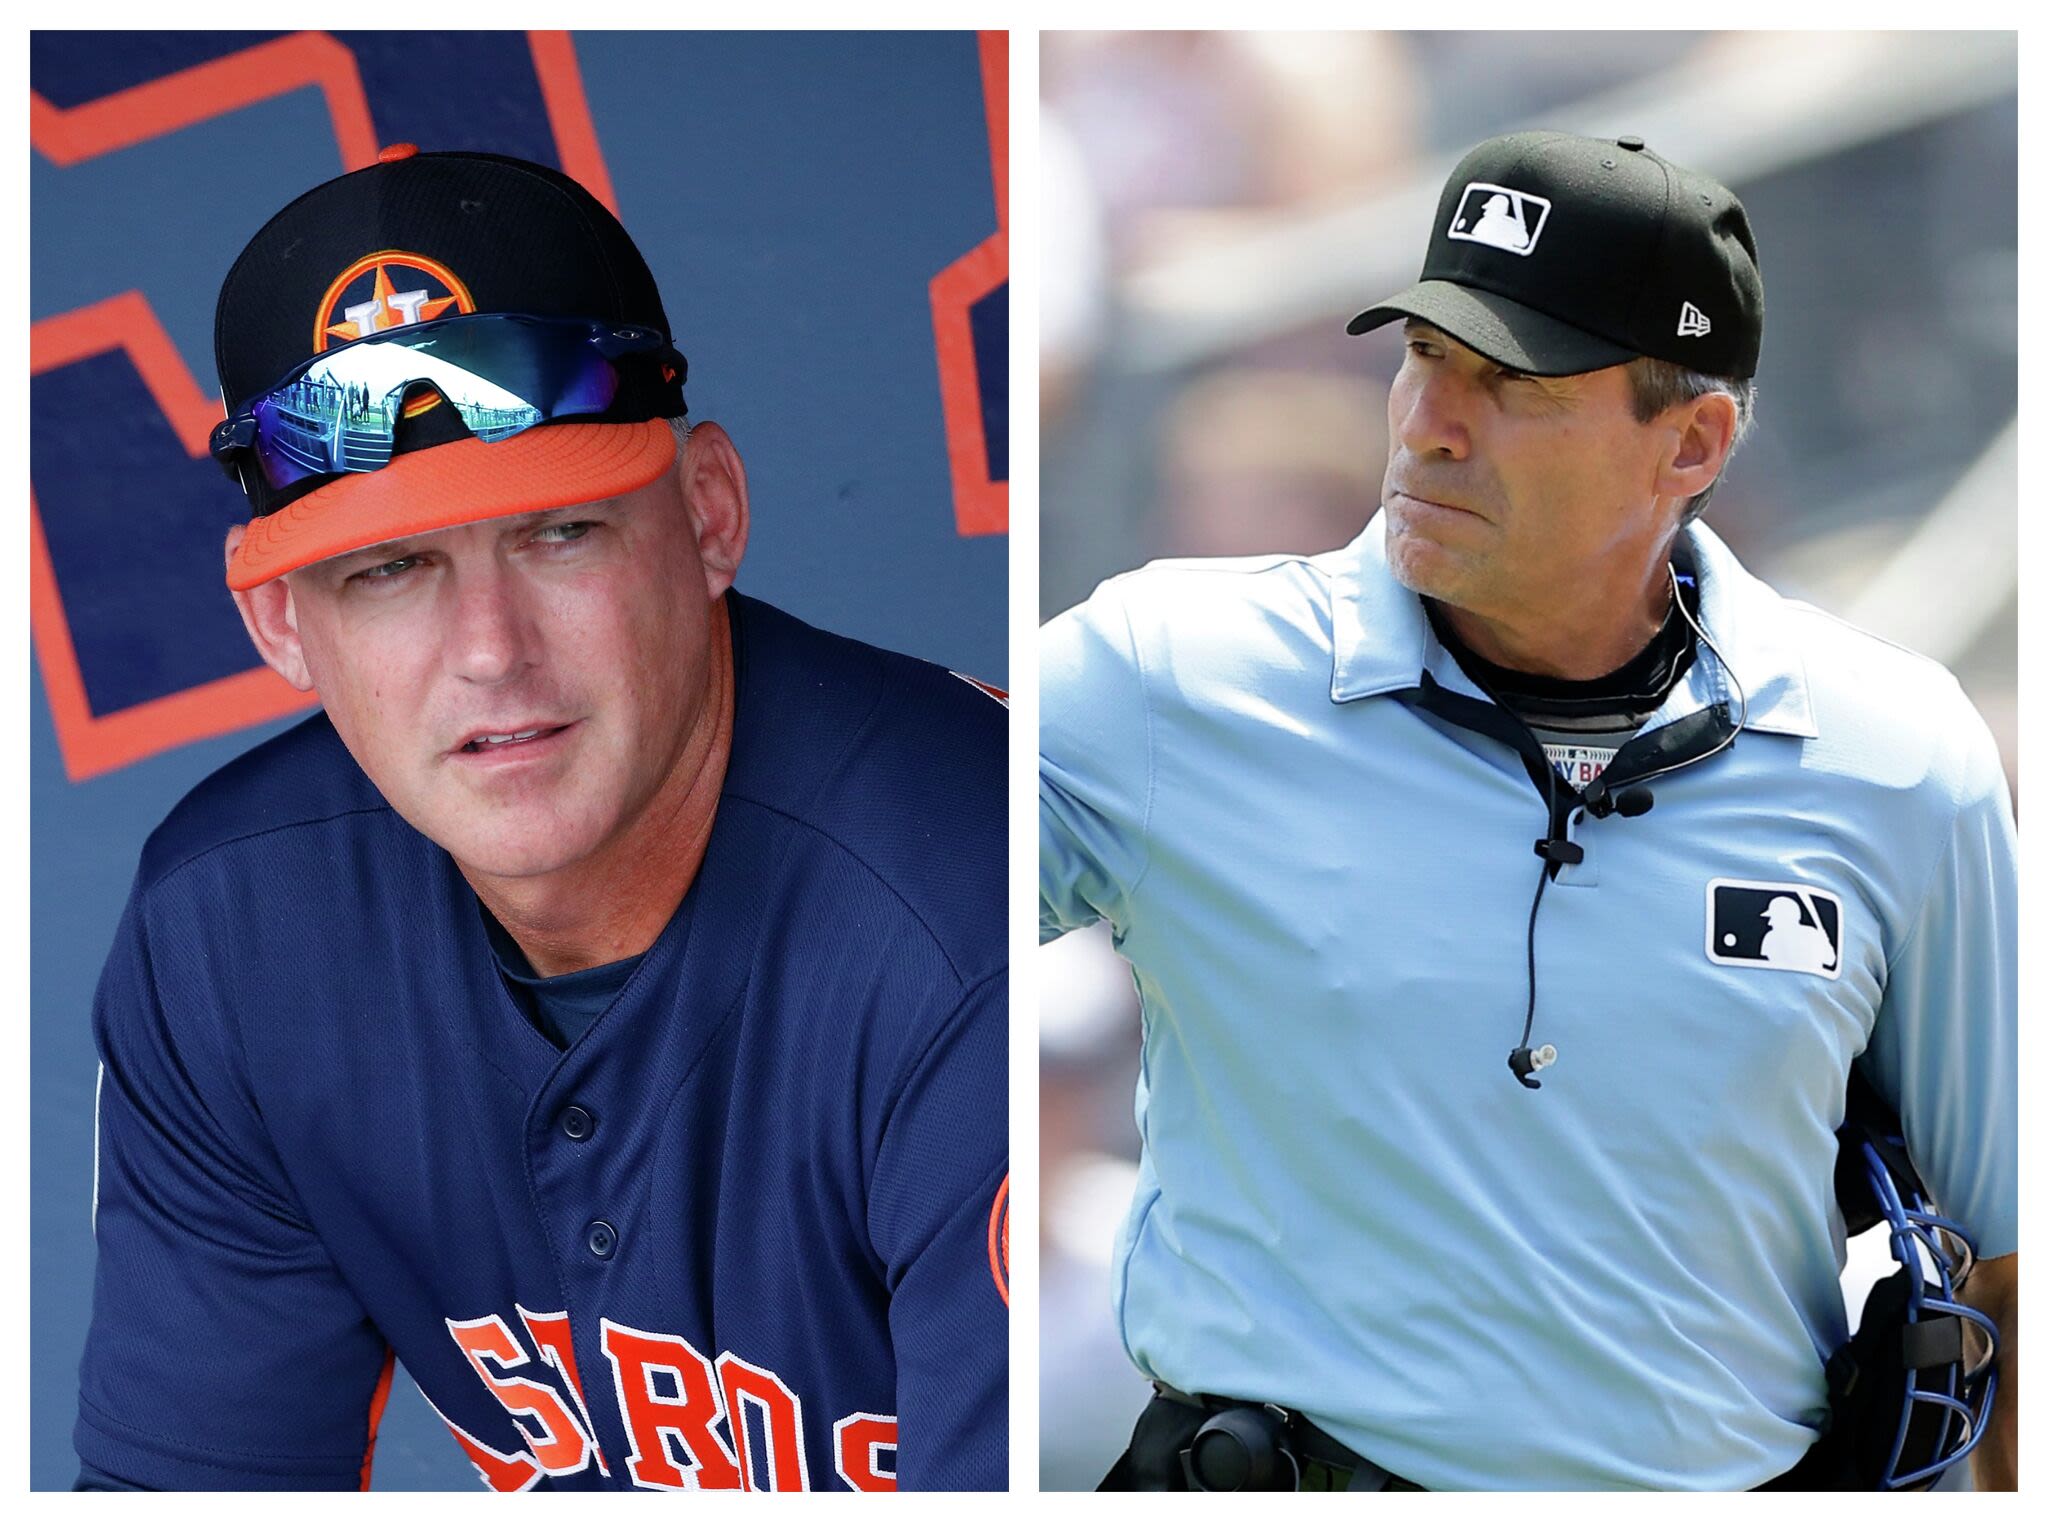 Angel Hernandez’s most absurd ejection? Tossing Astros’ AJ Hinch